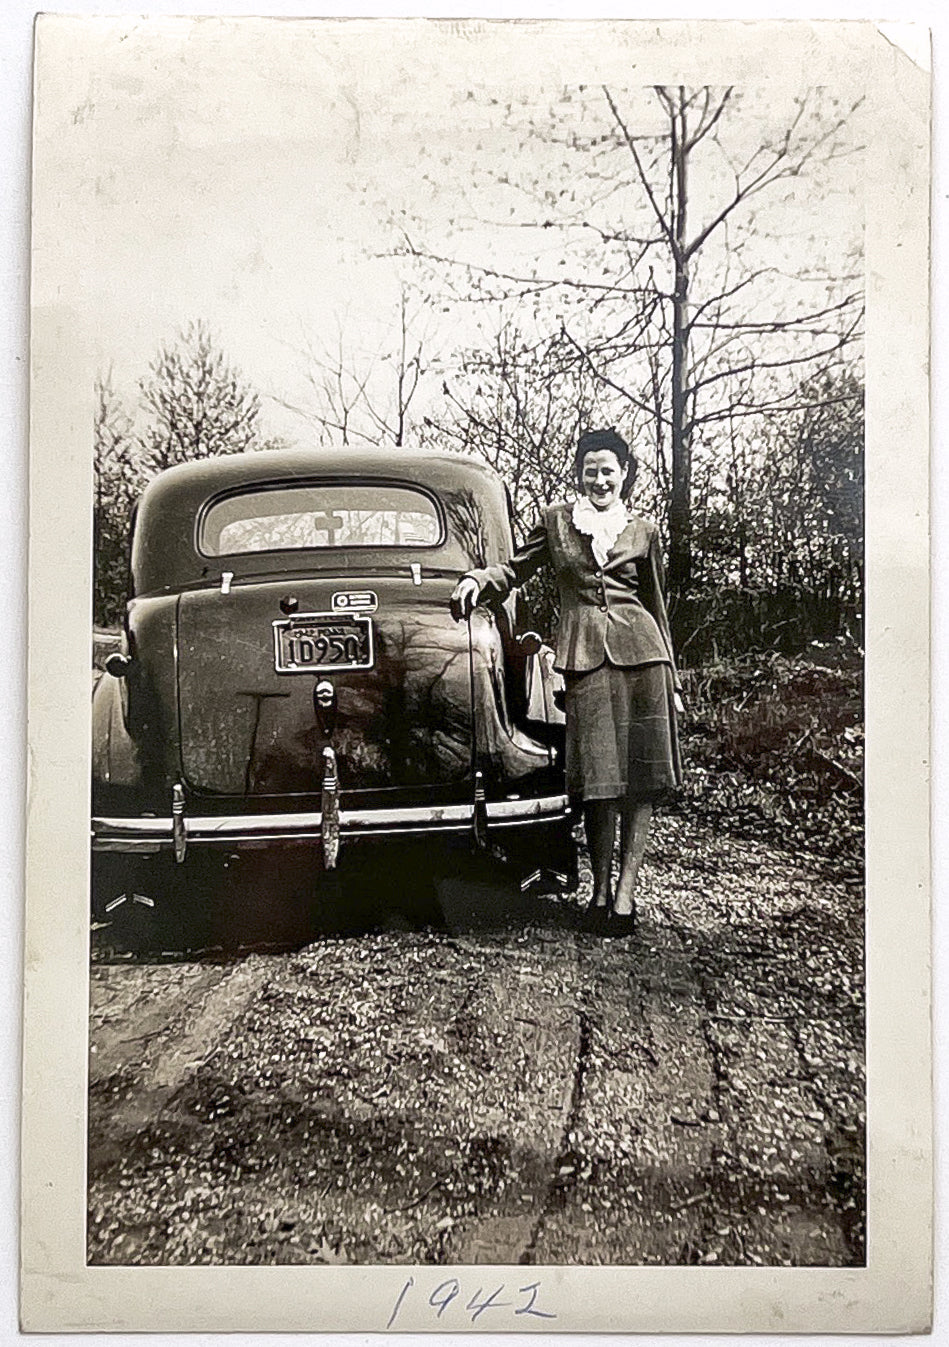 1942 snapshot of a woman posed next to a National Defense automobile